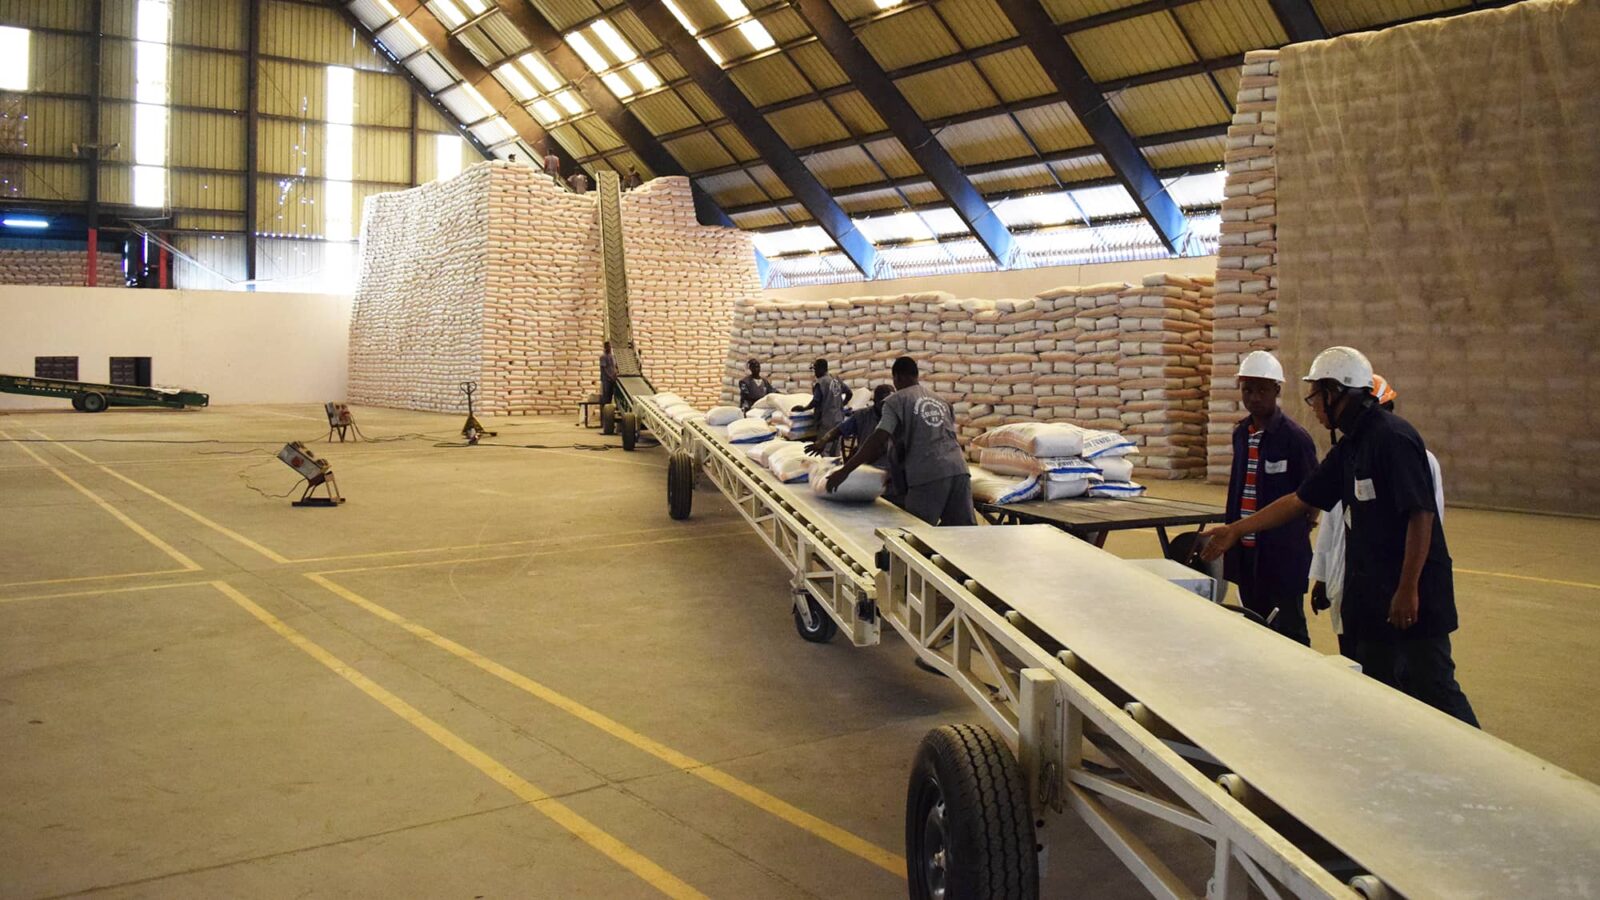 Conveying and handling of sugar bags in Africa